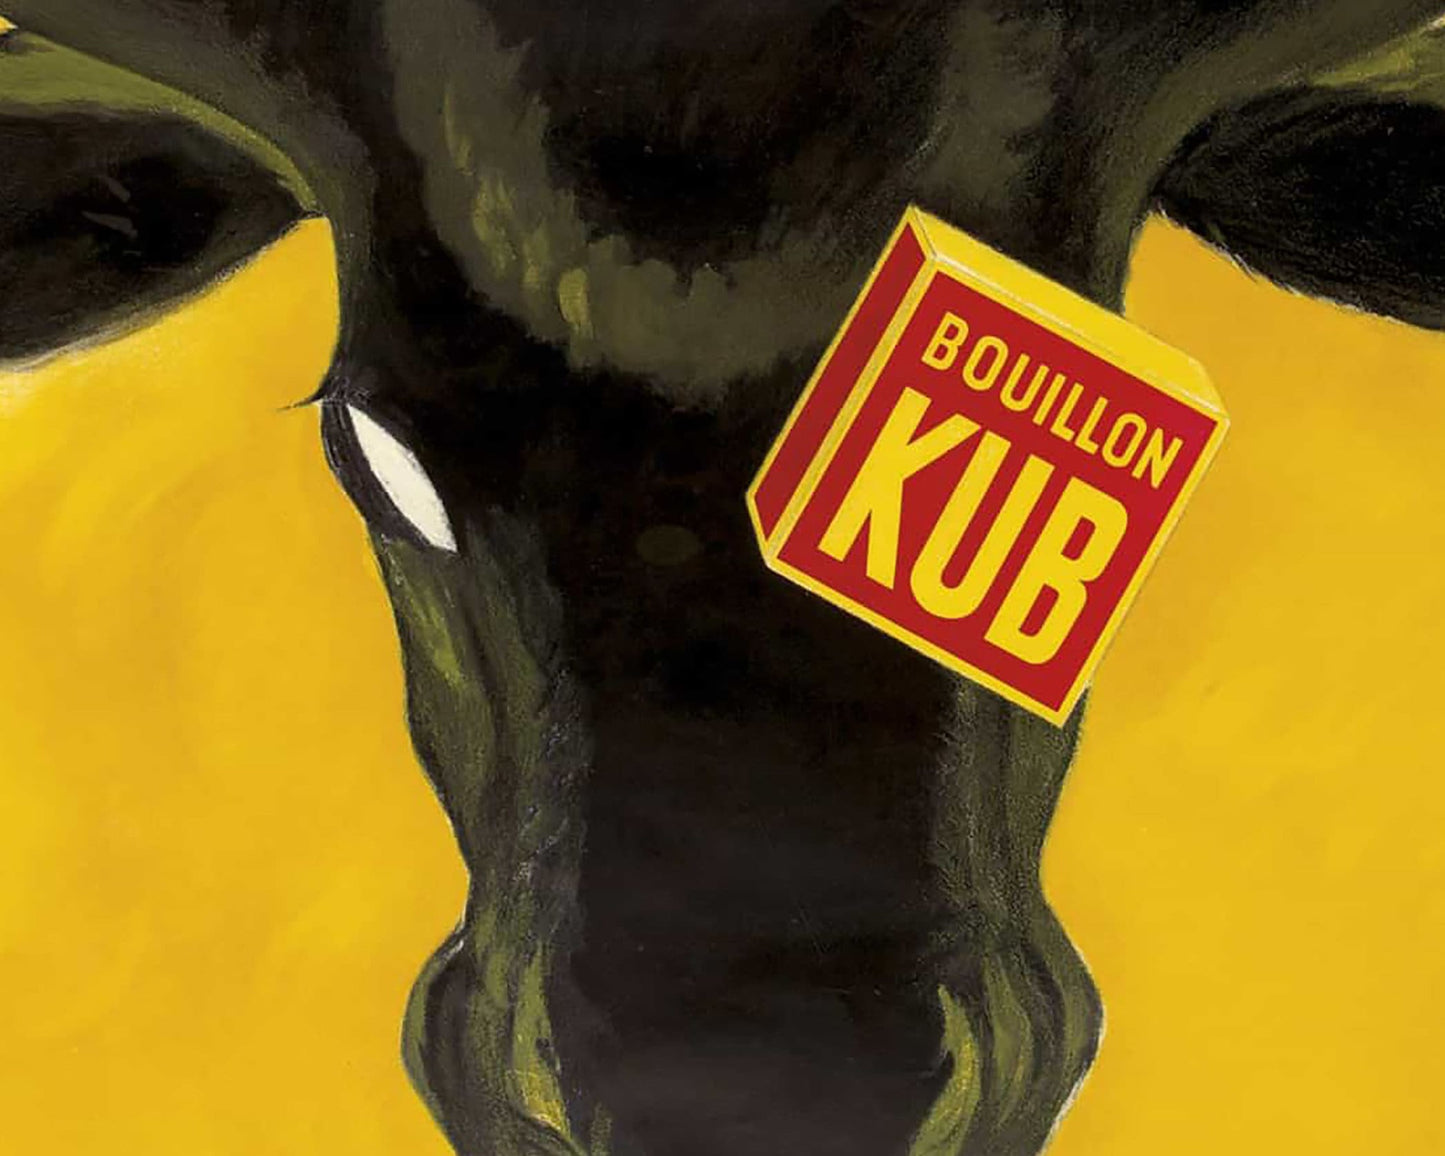 Vintage French advertisement | Bouillon Kub | Bull painting | Colorful kitchen and farm wall art